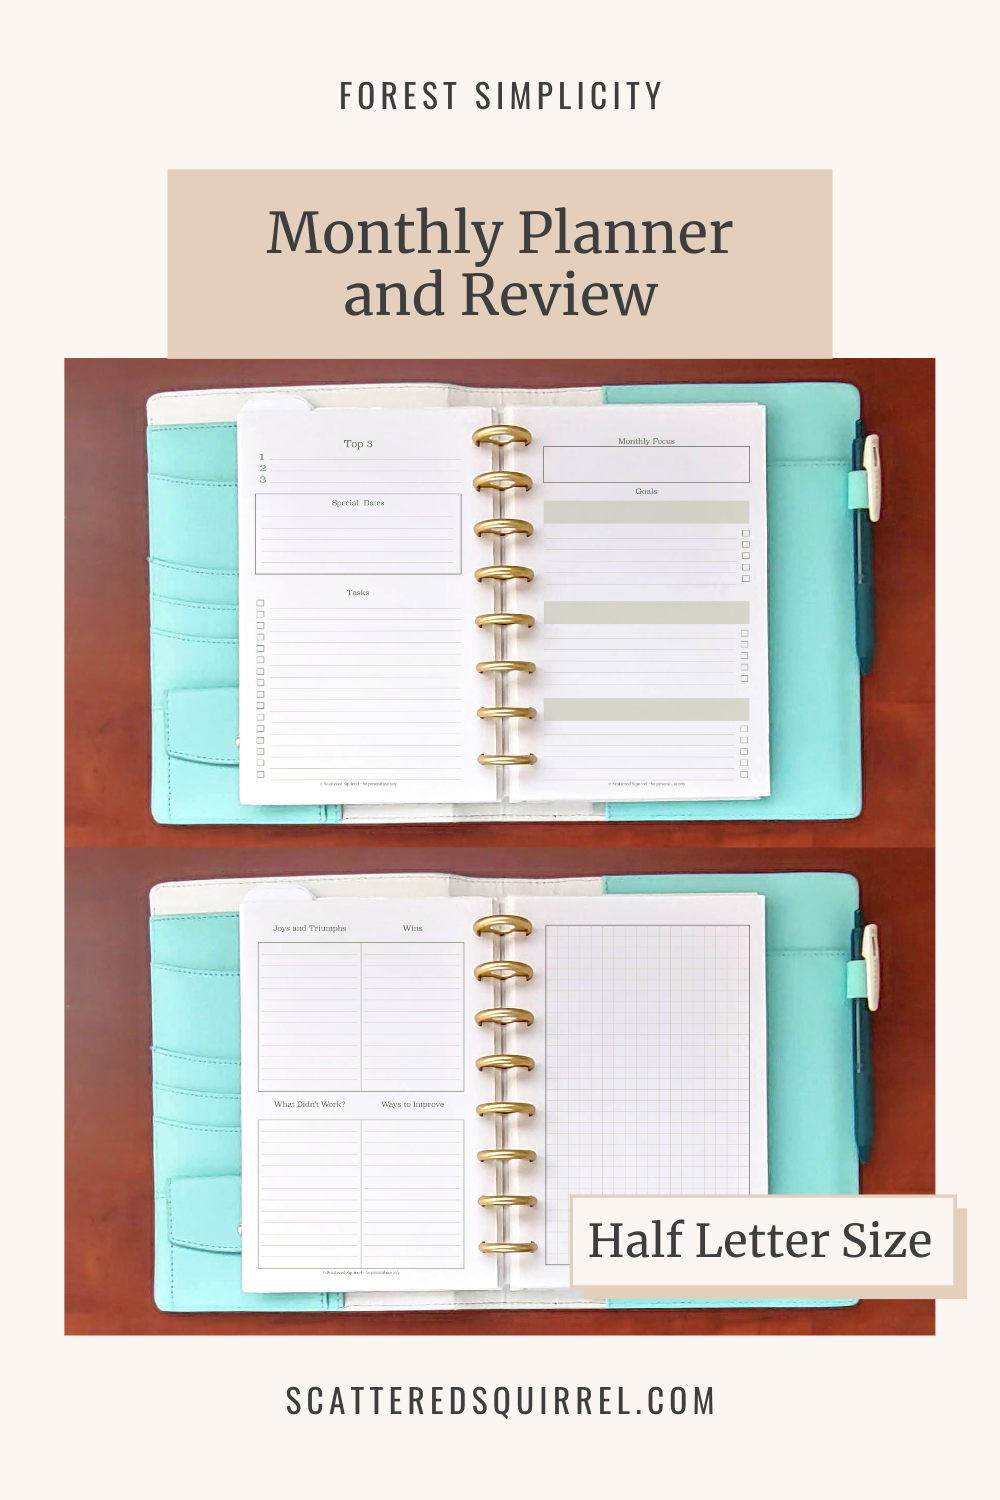 Image says "Forest Simplicity - Monthly Planner and Review" at the top. Under are two images of a white and teal planner lying open on a wooden desk. The first image shows a monthly planner the second show a monthly review. This image links to the Half Letter Size Monthly Planner and Review PDF that can be downloaded.